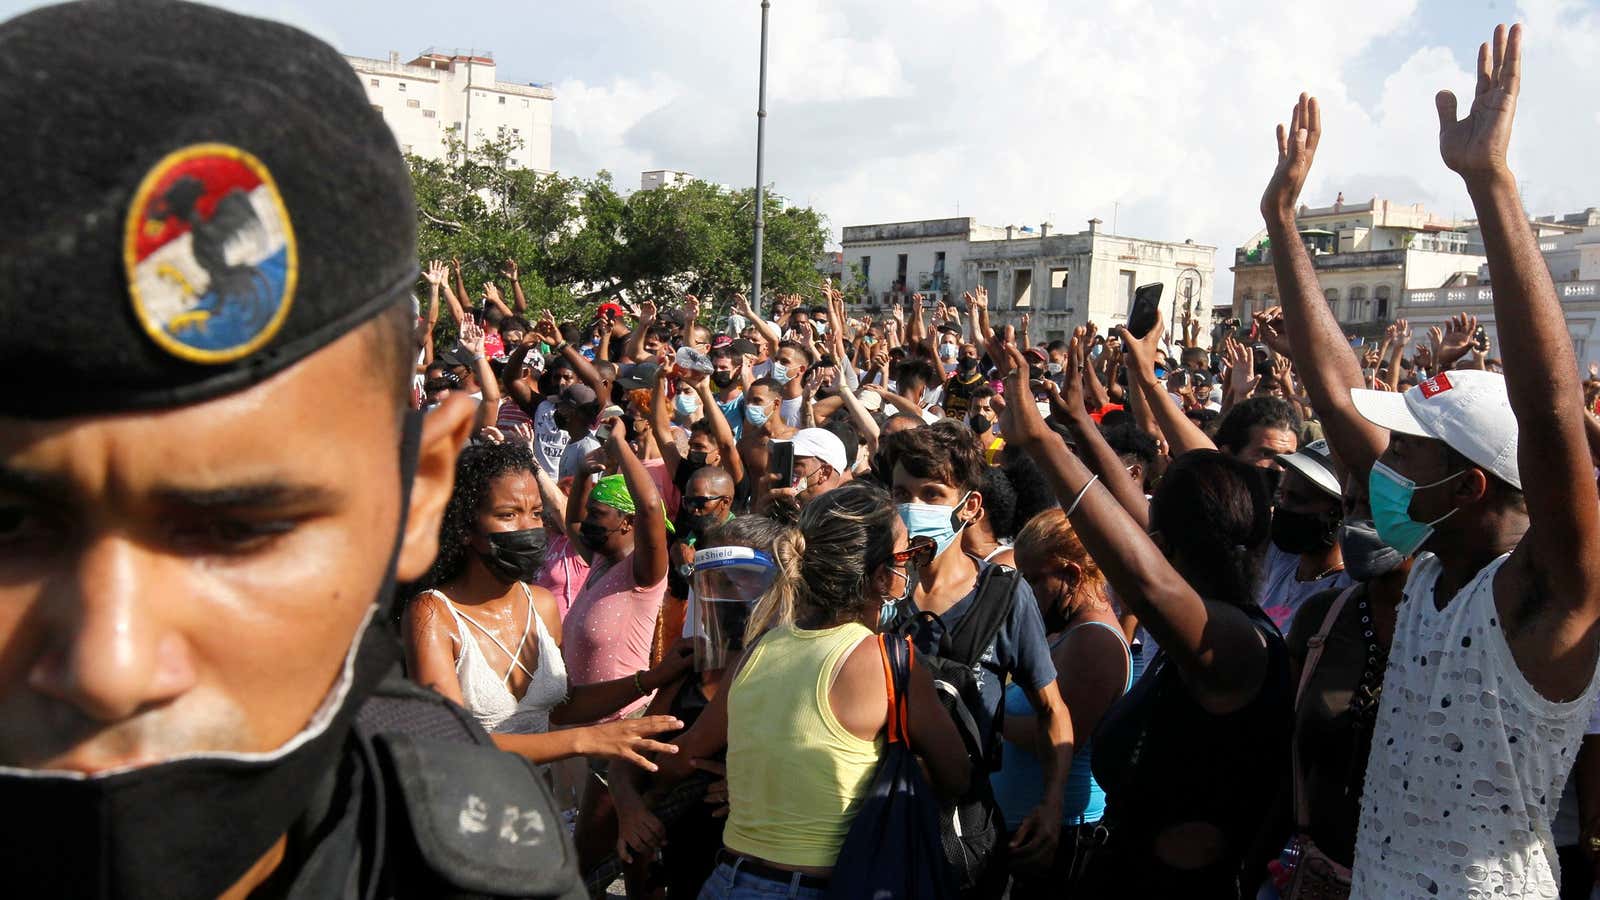 The Cuban government called in its â€œblack beretsâ€� special forces units to quell protests.